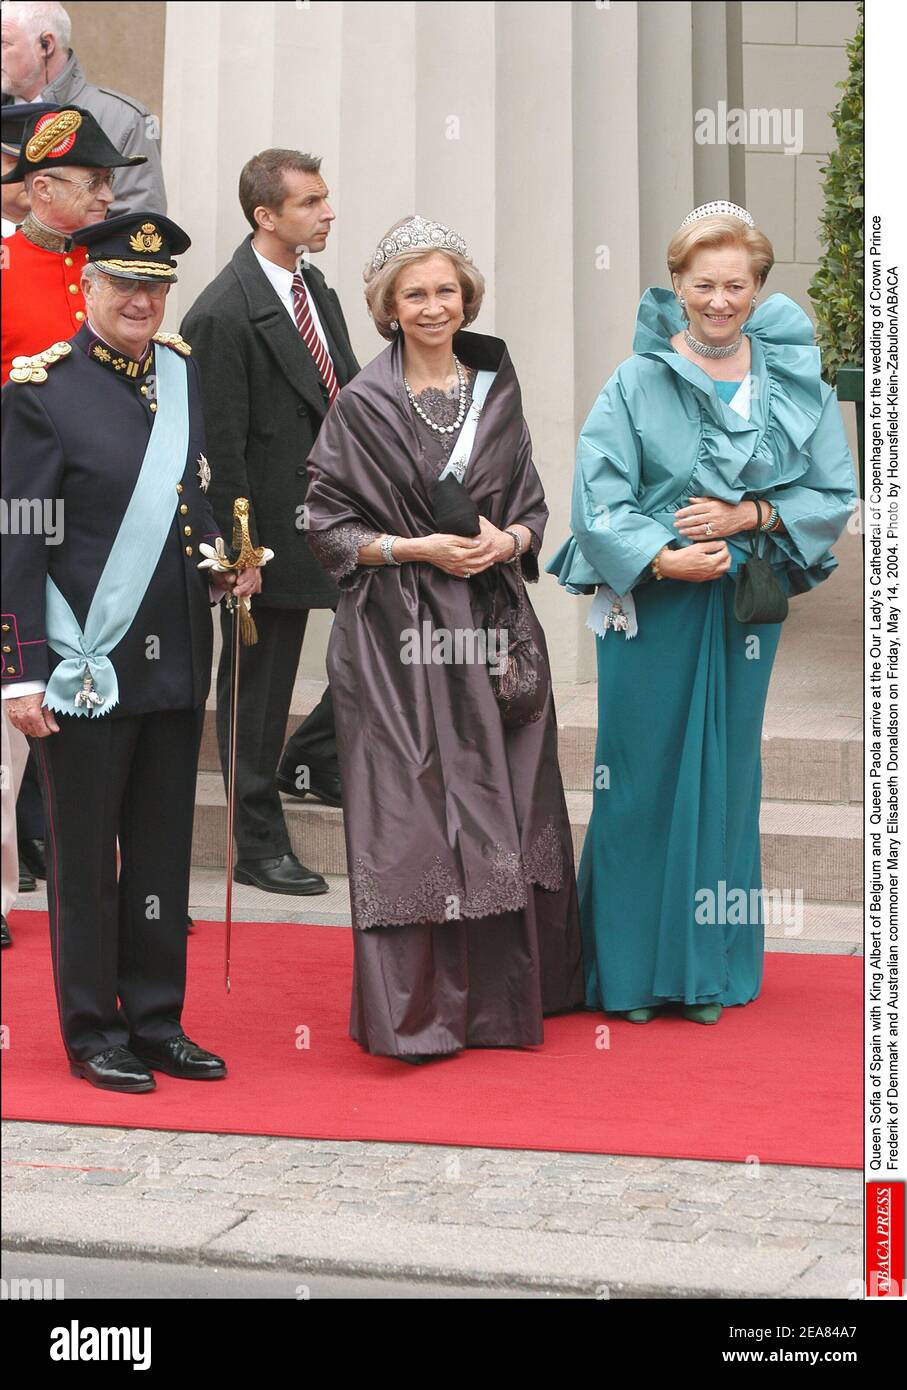 Queen Sofia of Spain with King Albert of Belgium and Queen Paola arrive at  the Our Lady's Cathedral of Copenhagen for the wedding of Crown Prince  Frederik of Denmark and Australian commoner